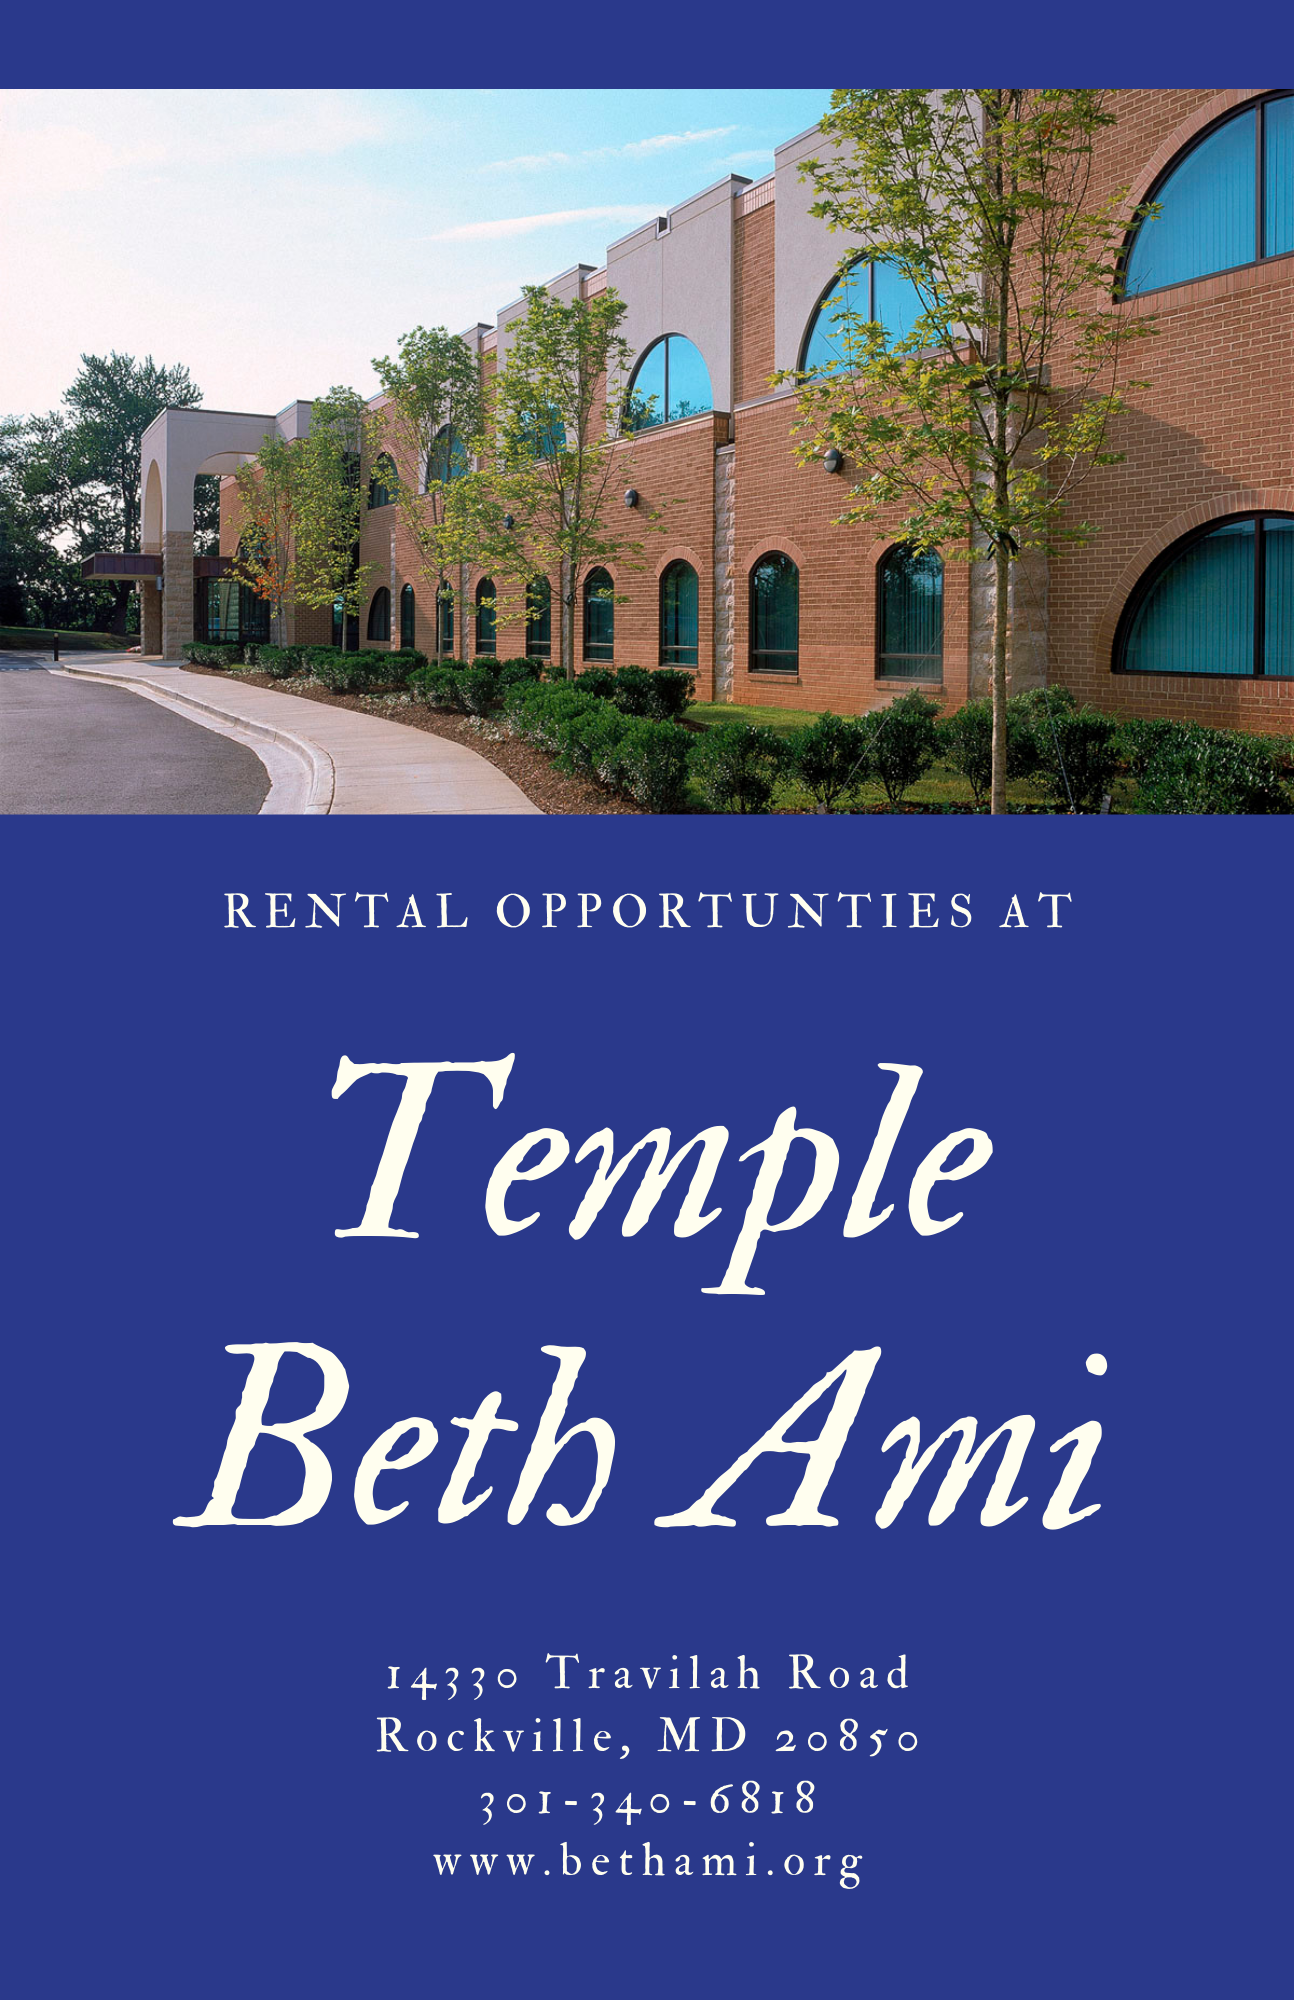 https://bethami.org/wp-content/uploads/sites/110/2021/01/Temple-Beth-Ami-Rental-Opportunities.png